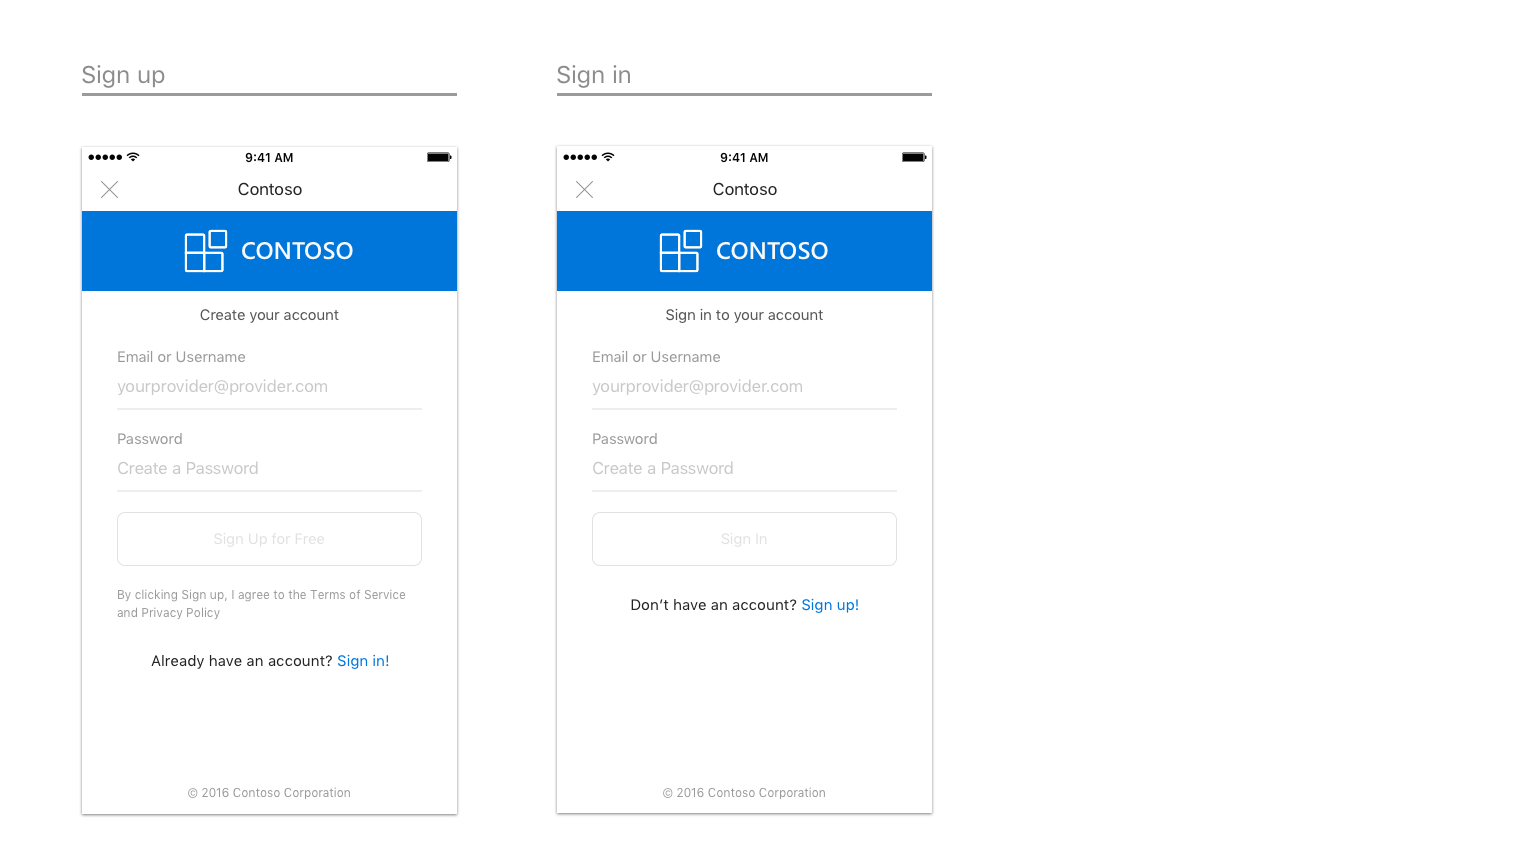 Examples of pages to sign in and sign up on iOS.